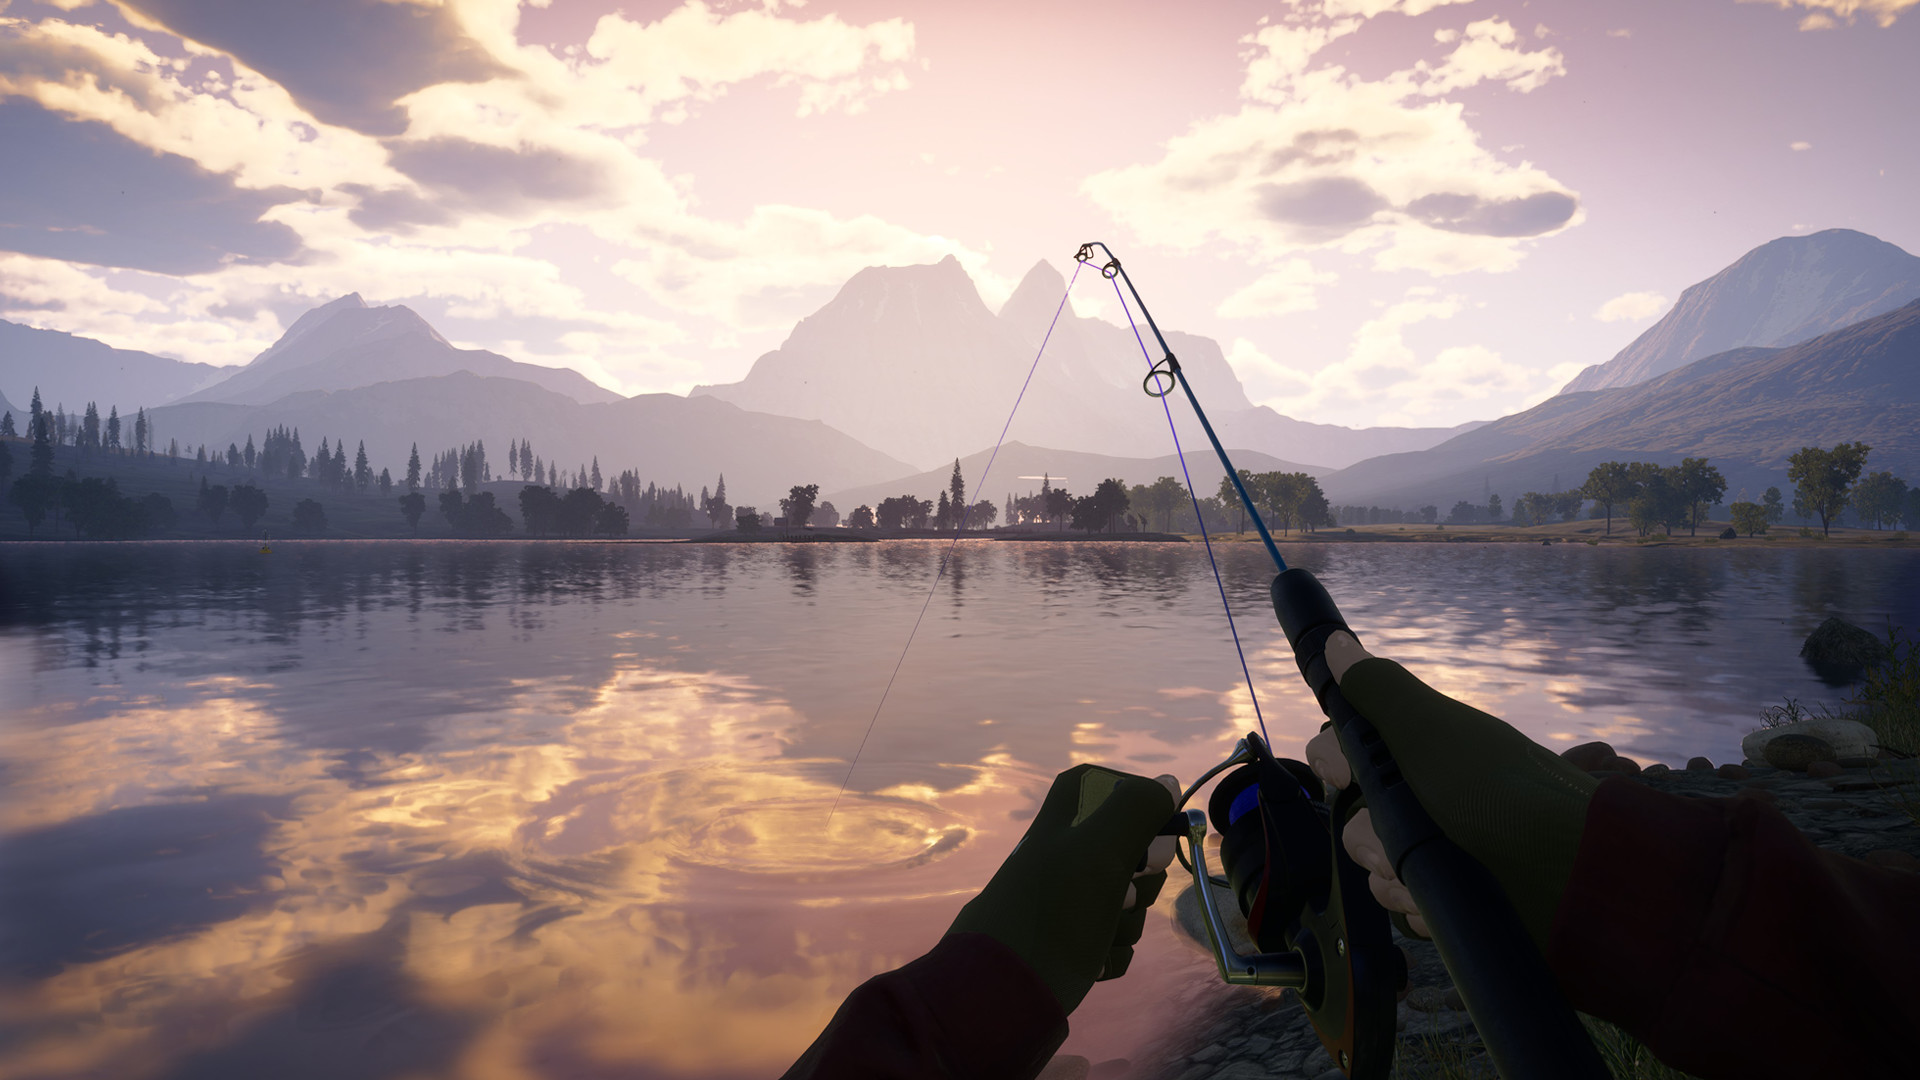 Call Of The Wild: The Angler Steam CD Key